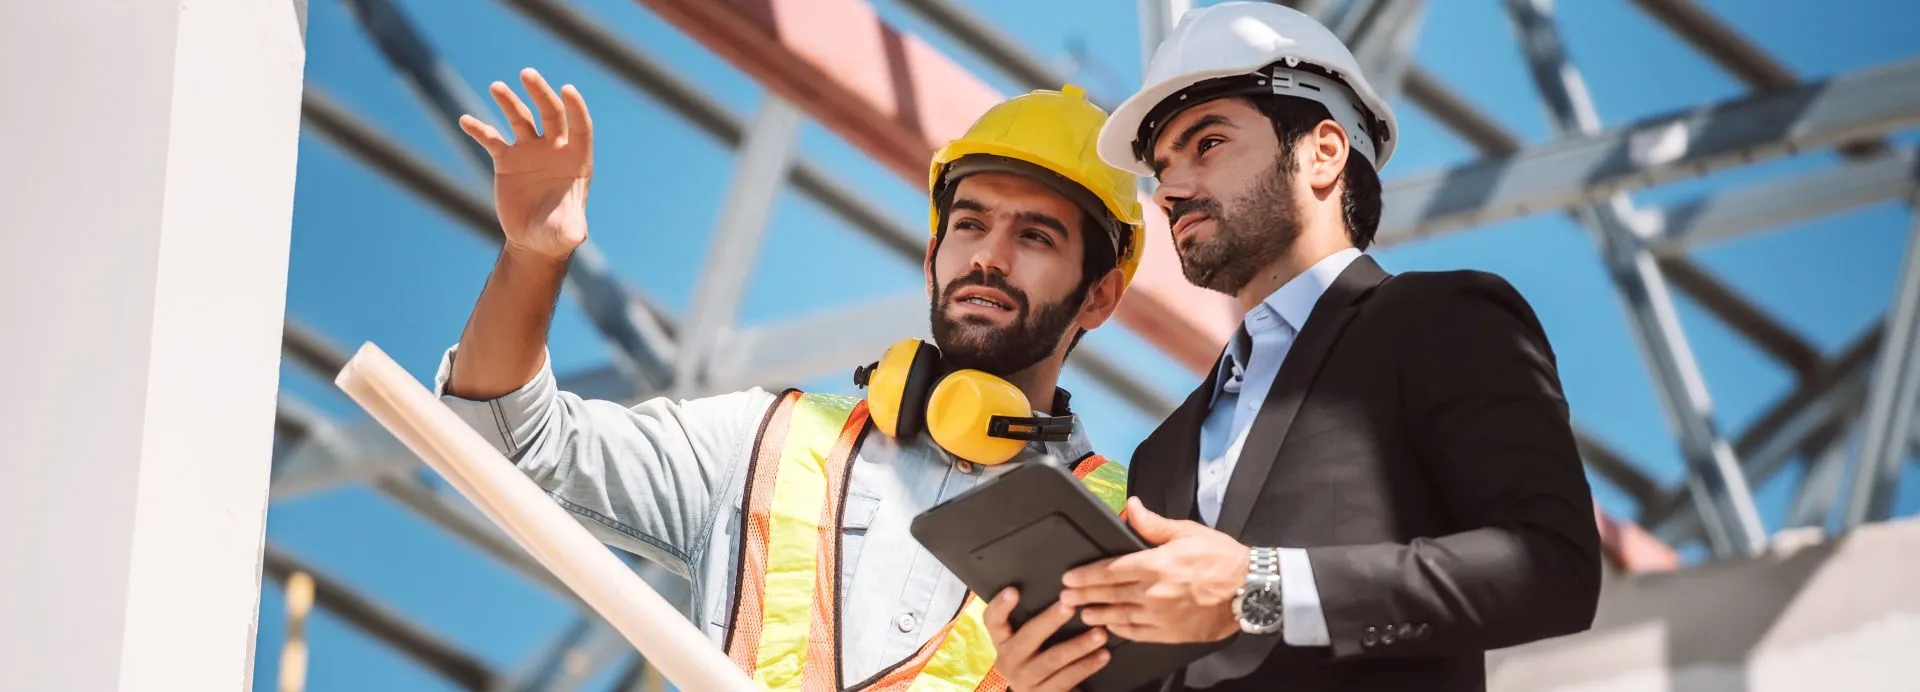 Main Responsibilities and Skills of a Project Manager in Construction